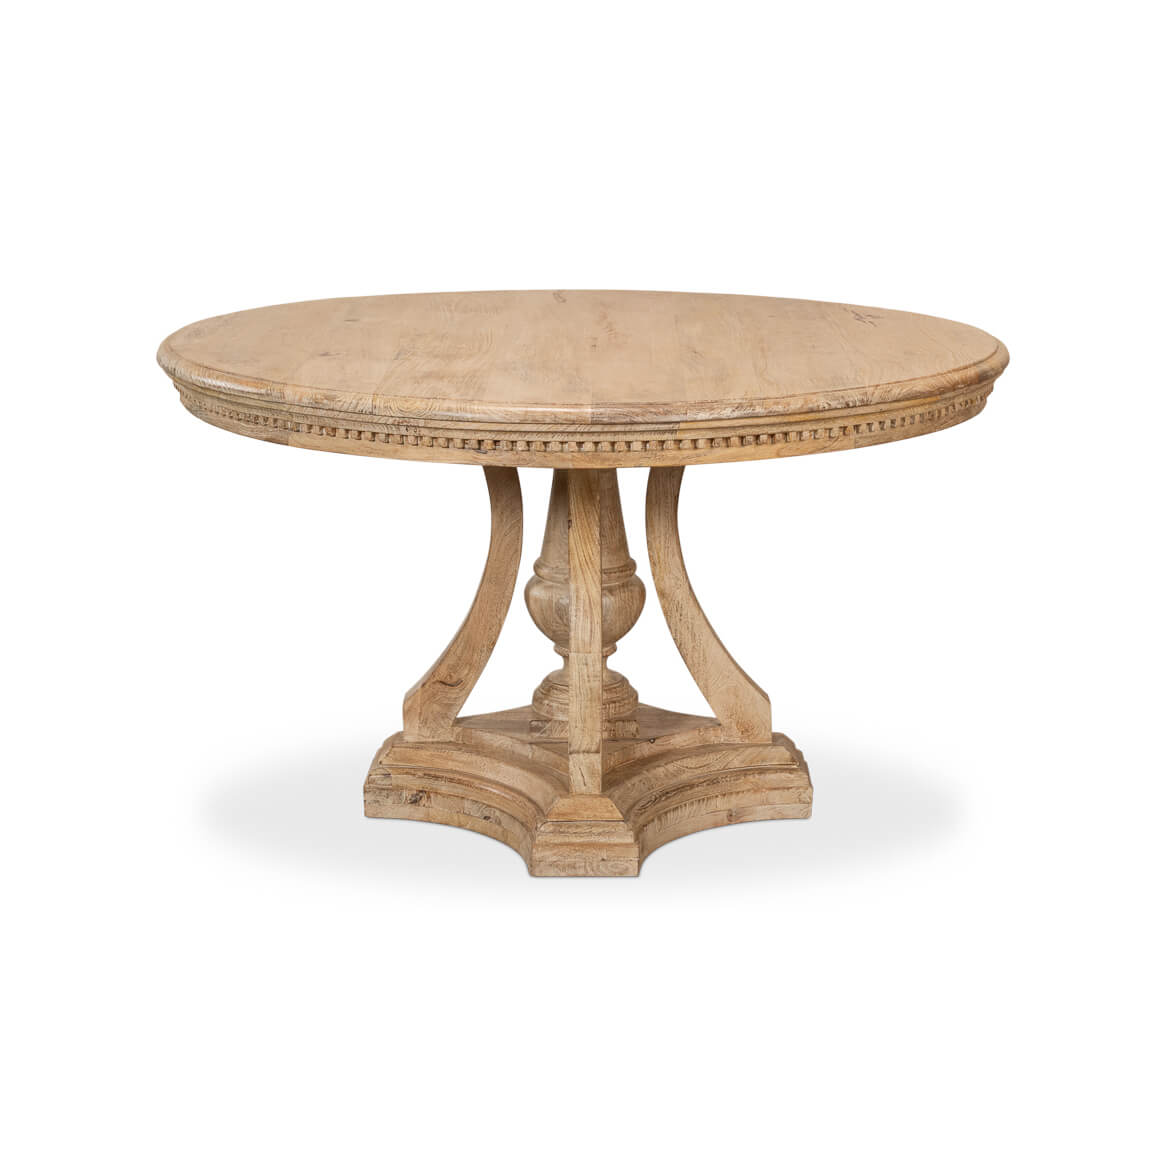 French Country Round Dining Table - English Georgian America